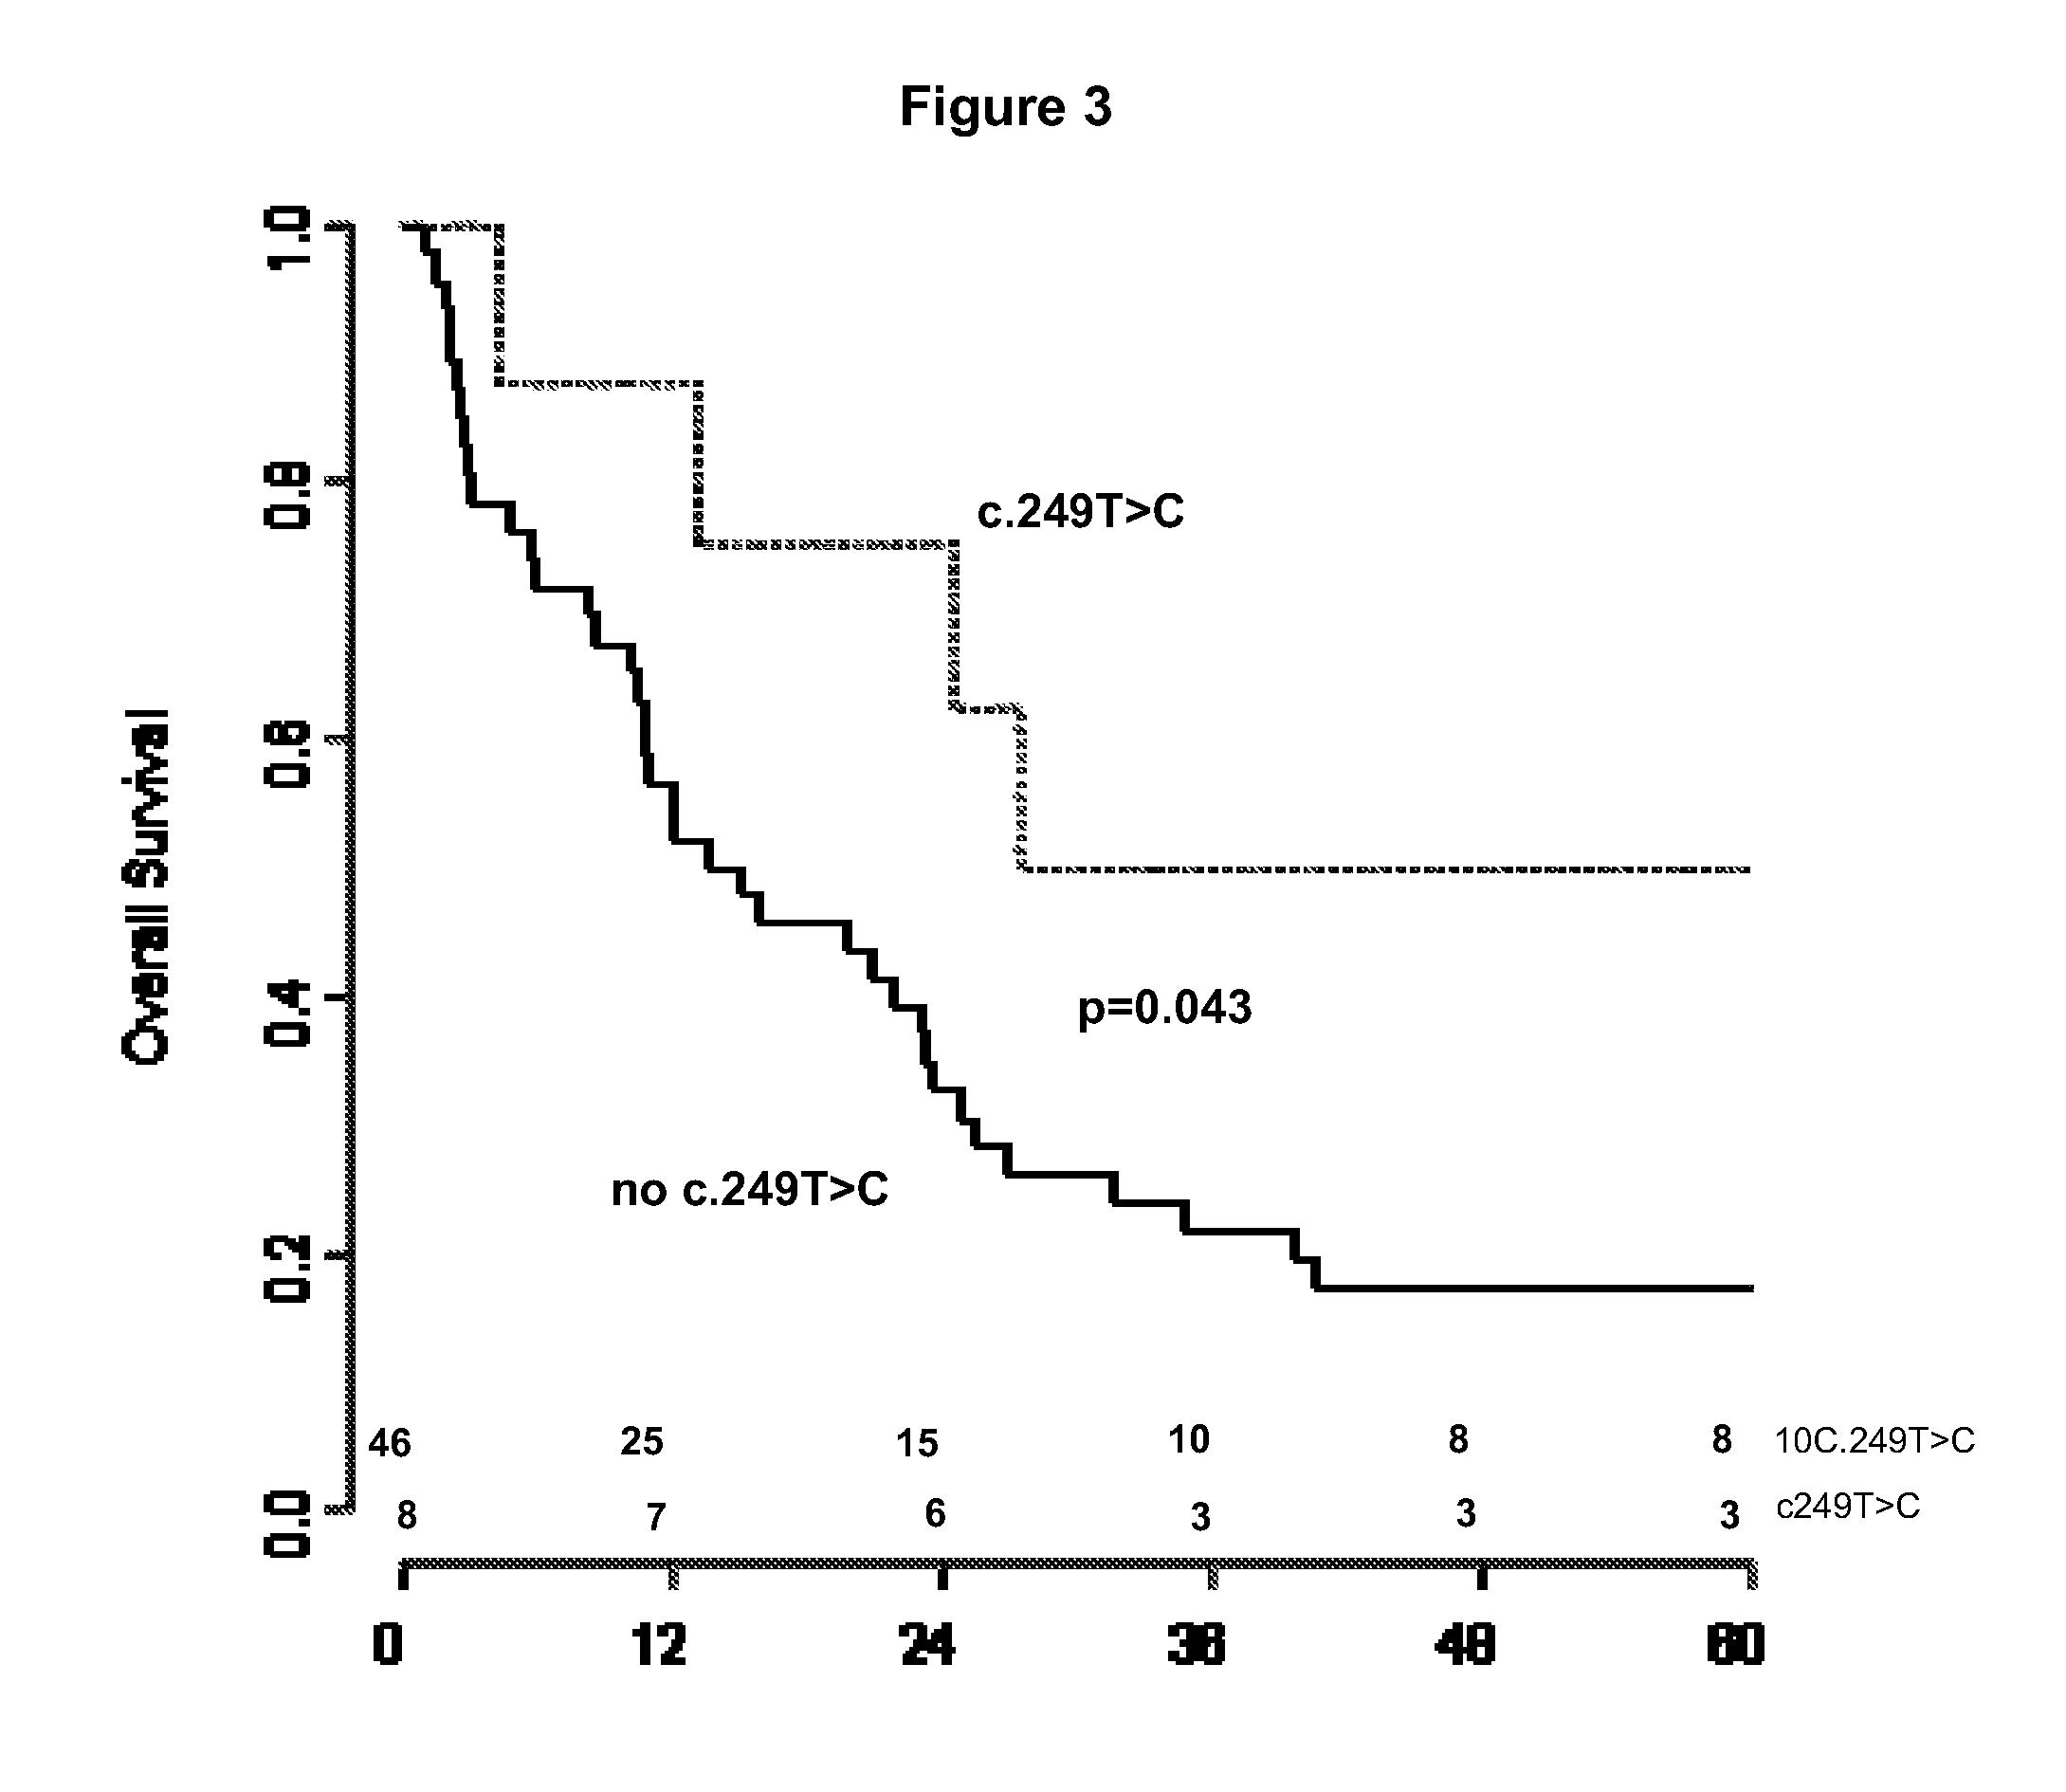 Ca9 gene single nucleotide polymorphisms predict prognosis and treatment response of metastatic renal cell carcinoma